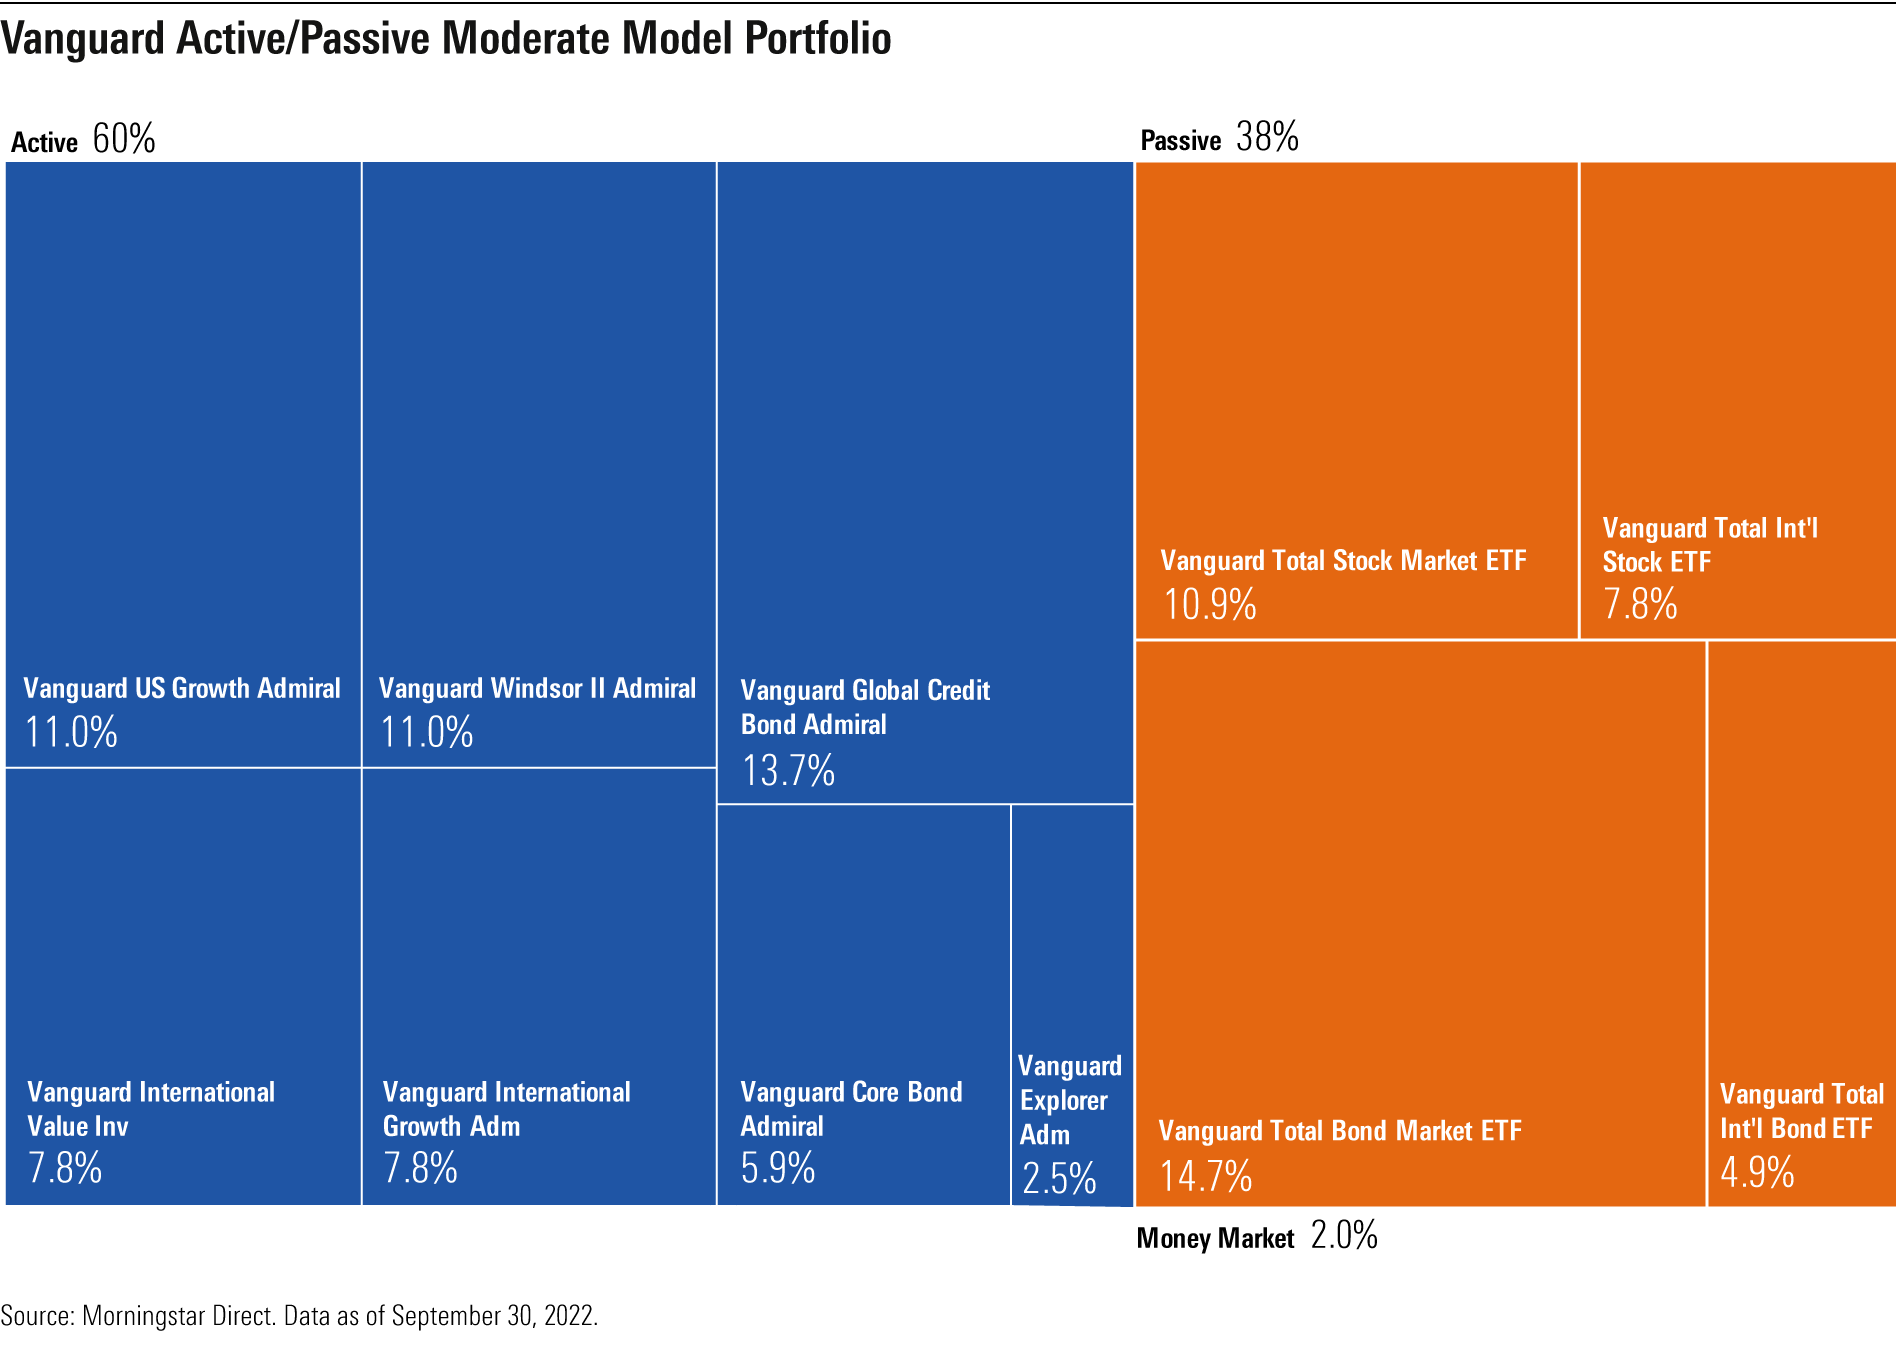 The breakdown of actively and passively managed strategies for the Vanguard Active/Passive Moderate model portfolio.